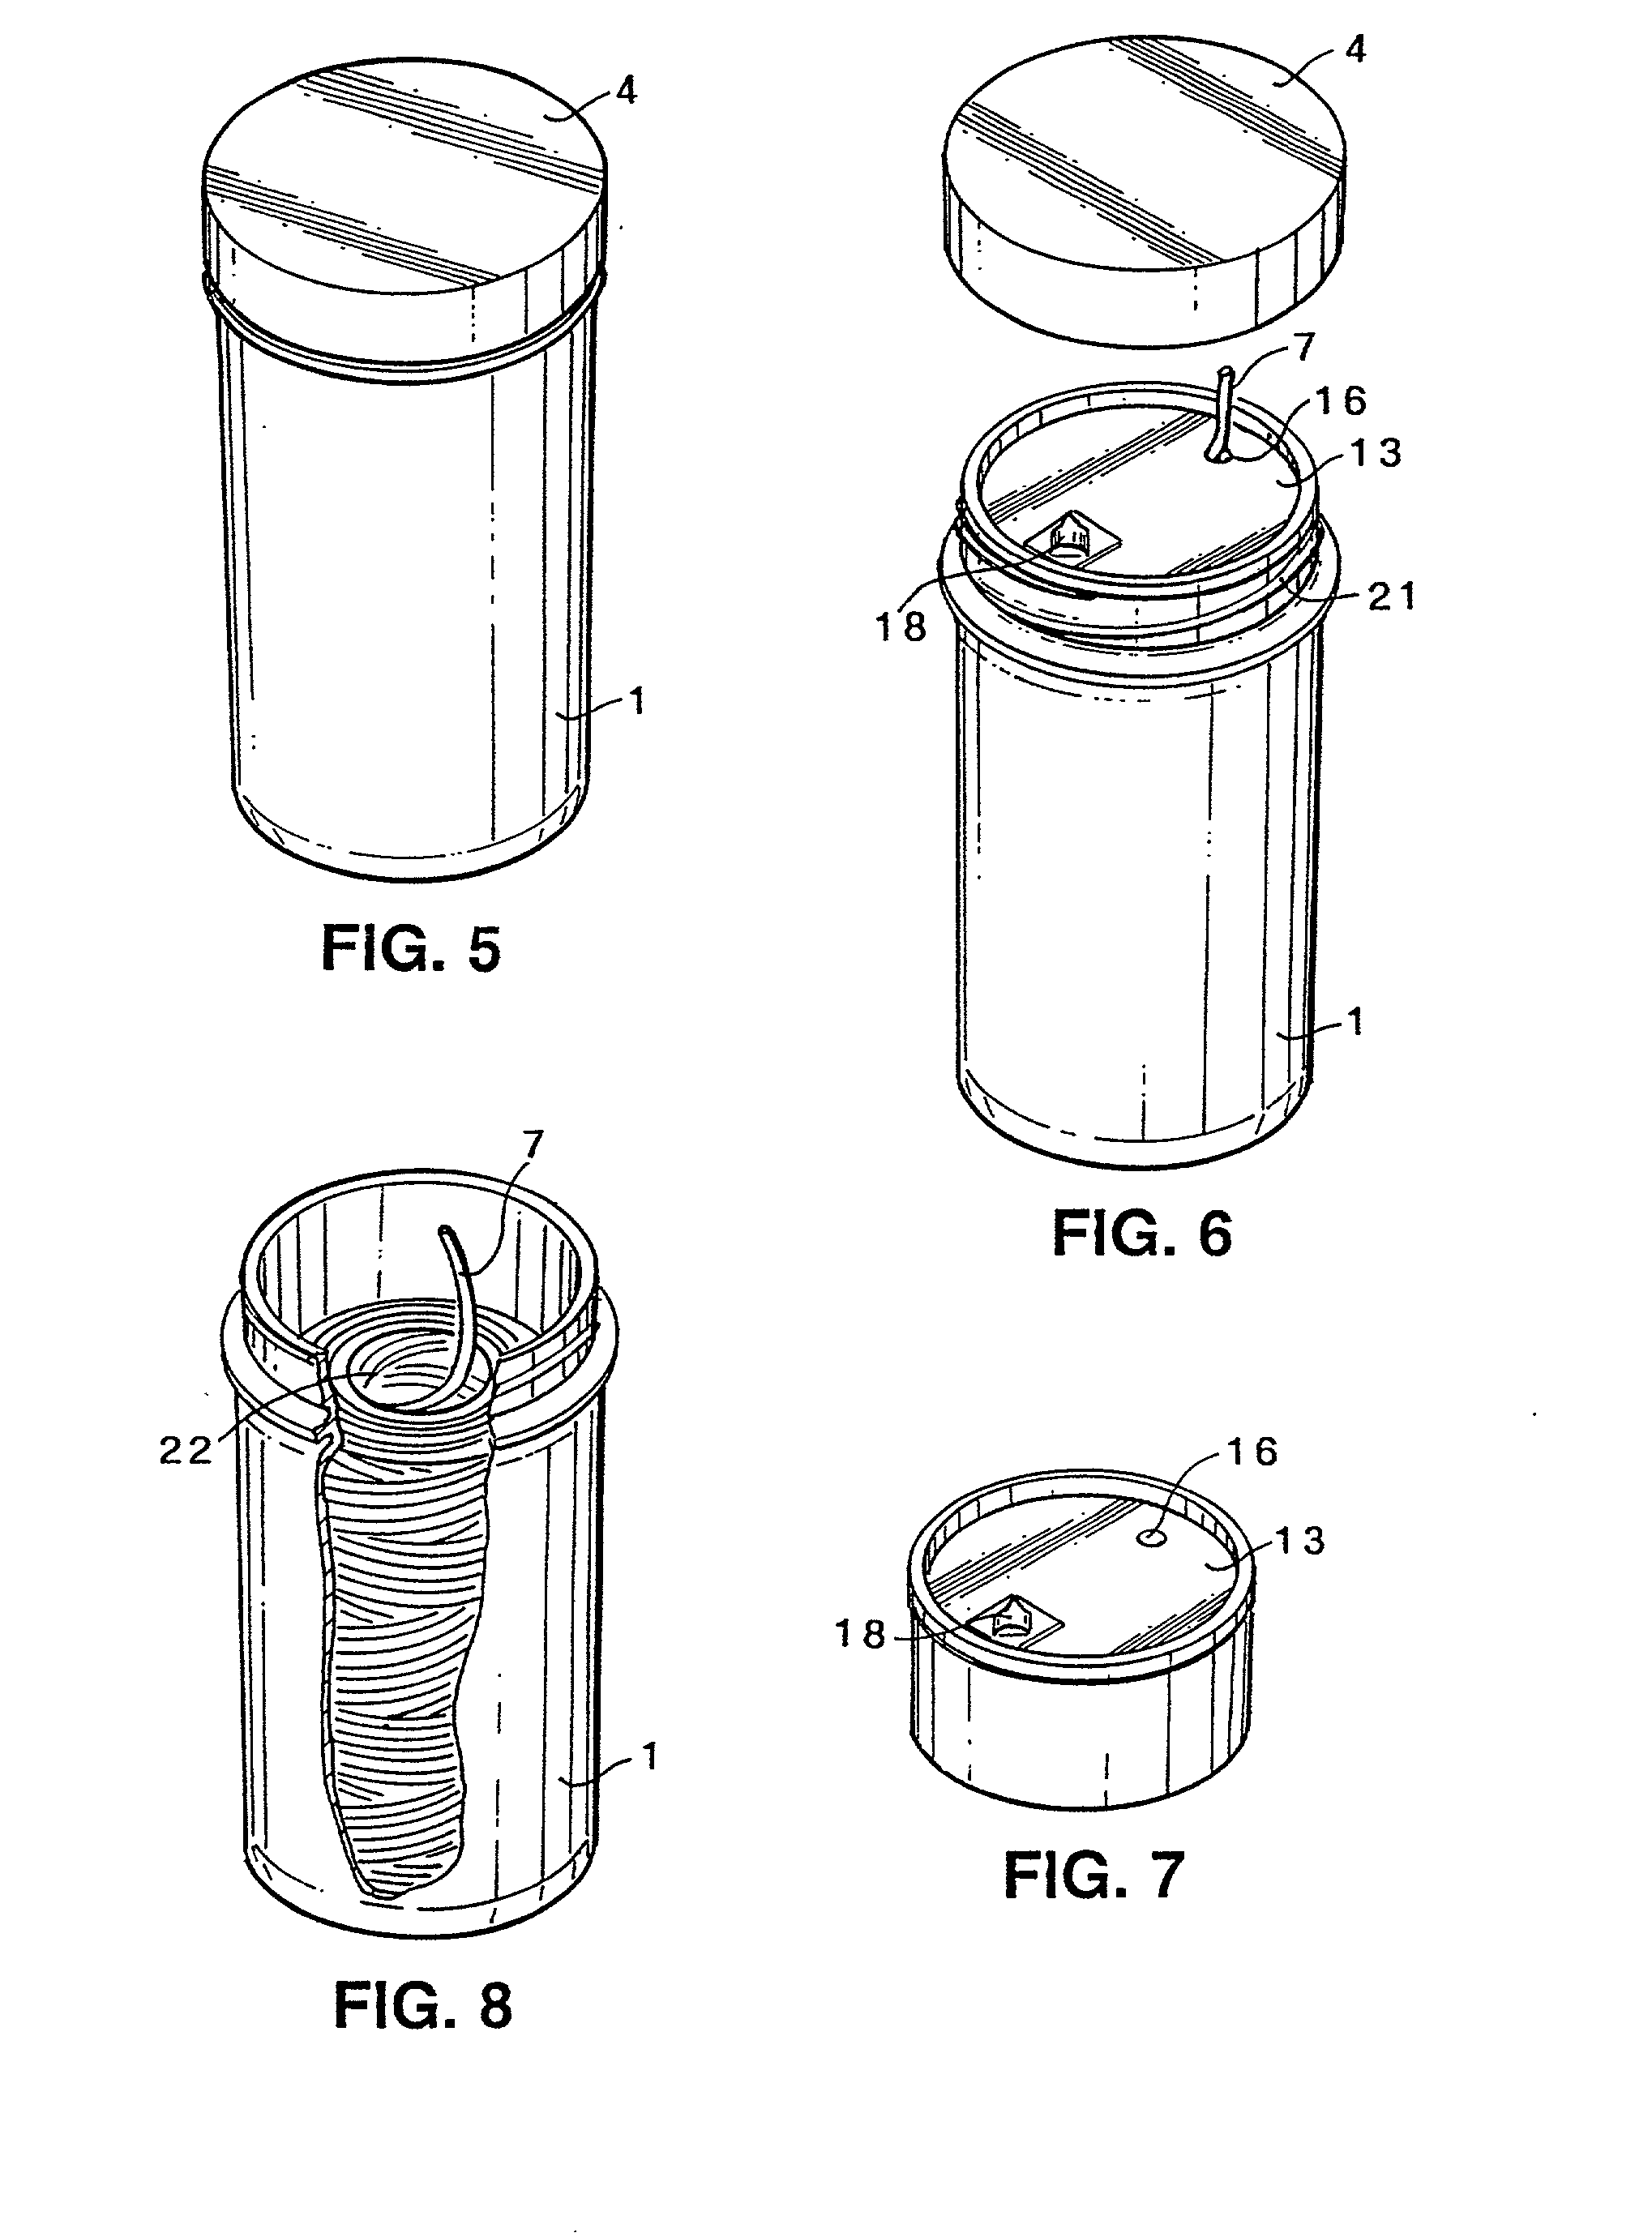 Material for sealing threaded pipe joints, and dispenser therefor